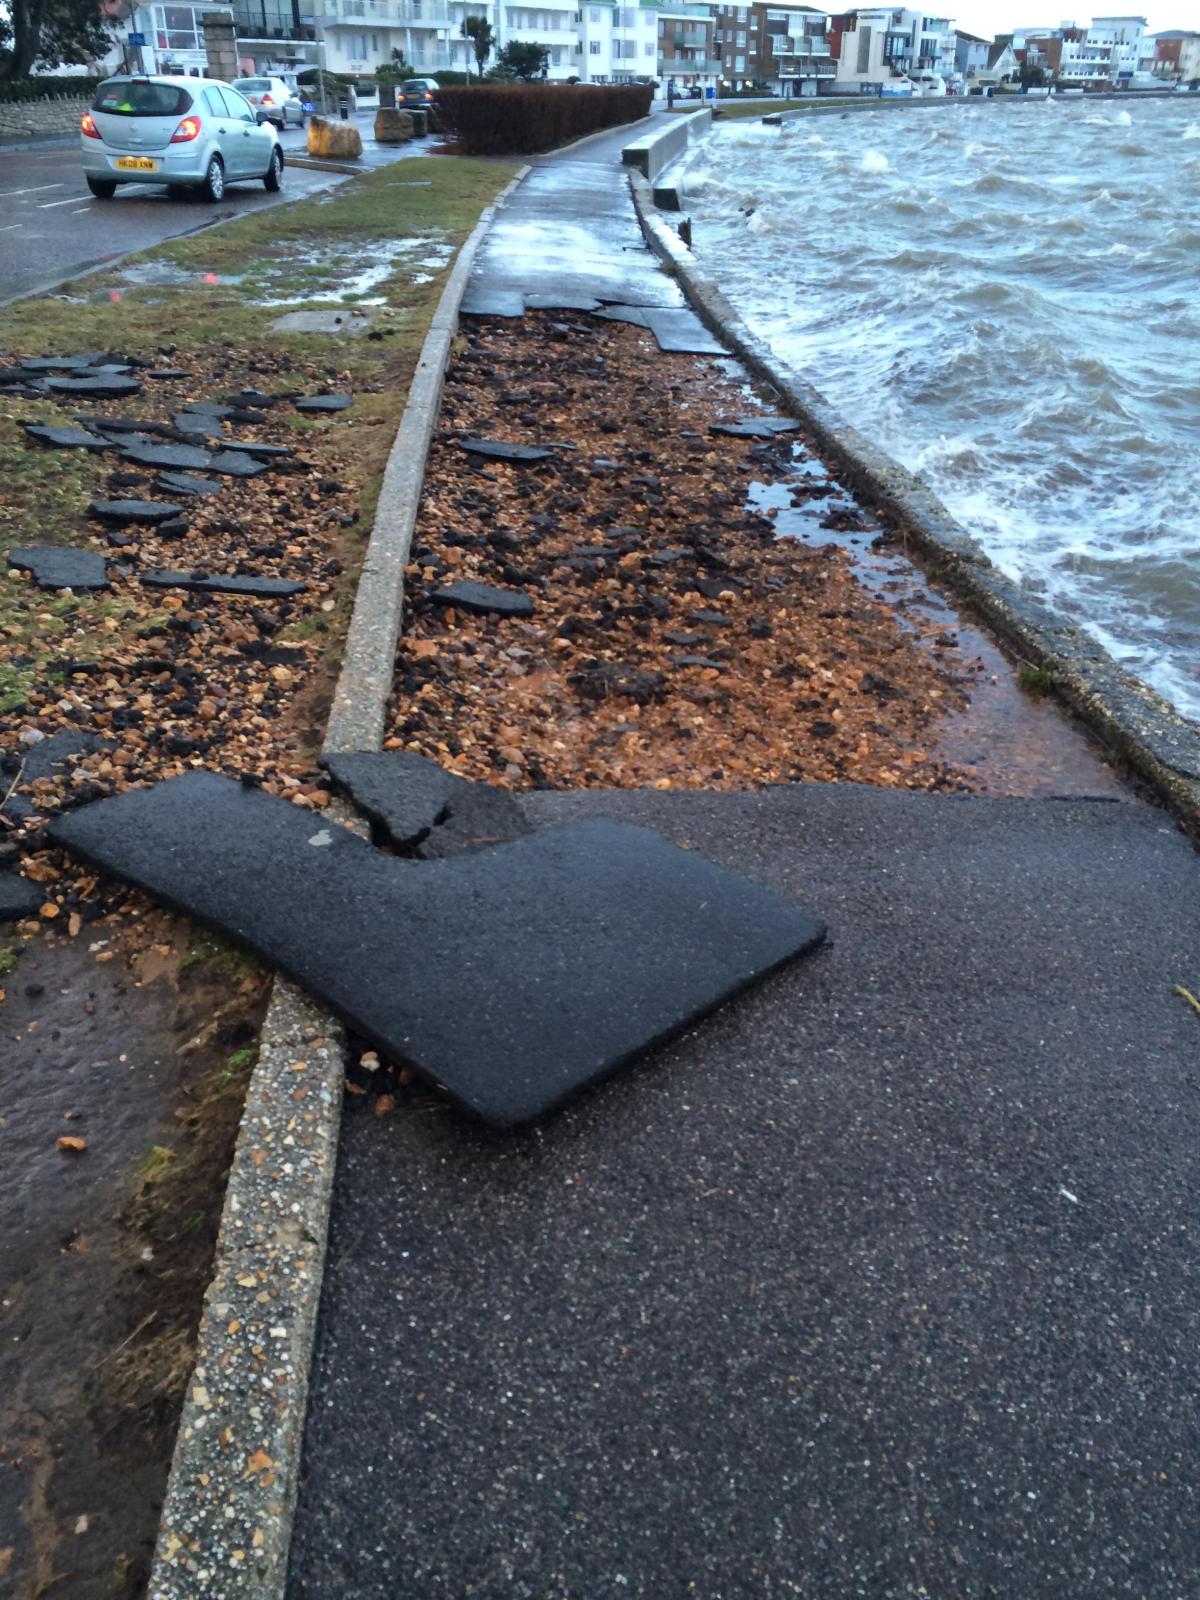 Daily Echo reader photos of the storm and damage left behind after severe weather swept through Dorset on February 14 and February 15. Picture sent by Ben Schofield of Sandbanks